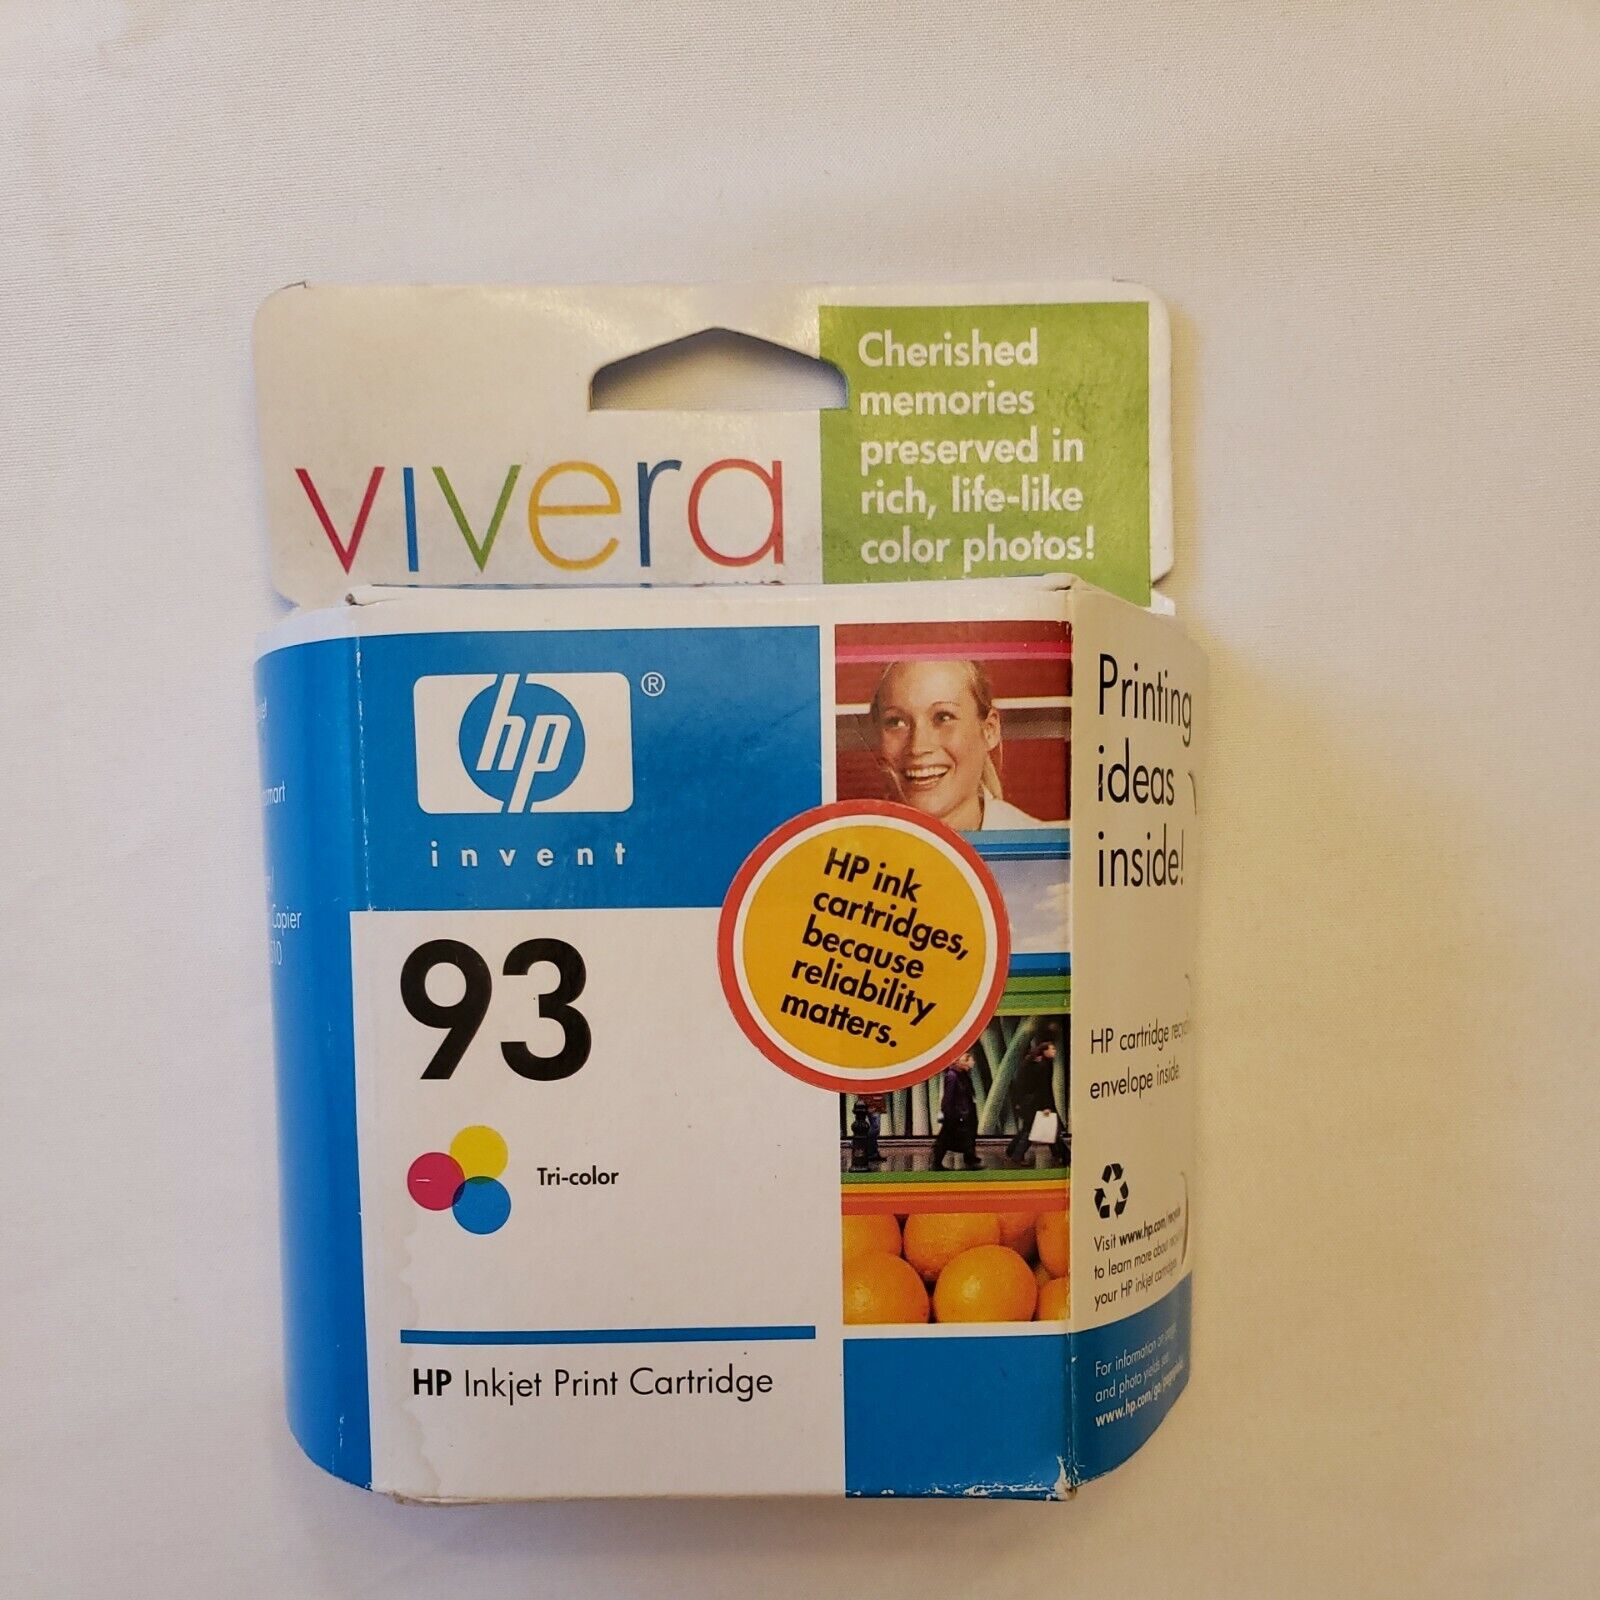 HP Invent 93 Tri-Color Inkjet Printer Cartridge 2007 Factory Sealed Expired 